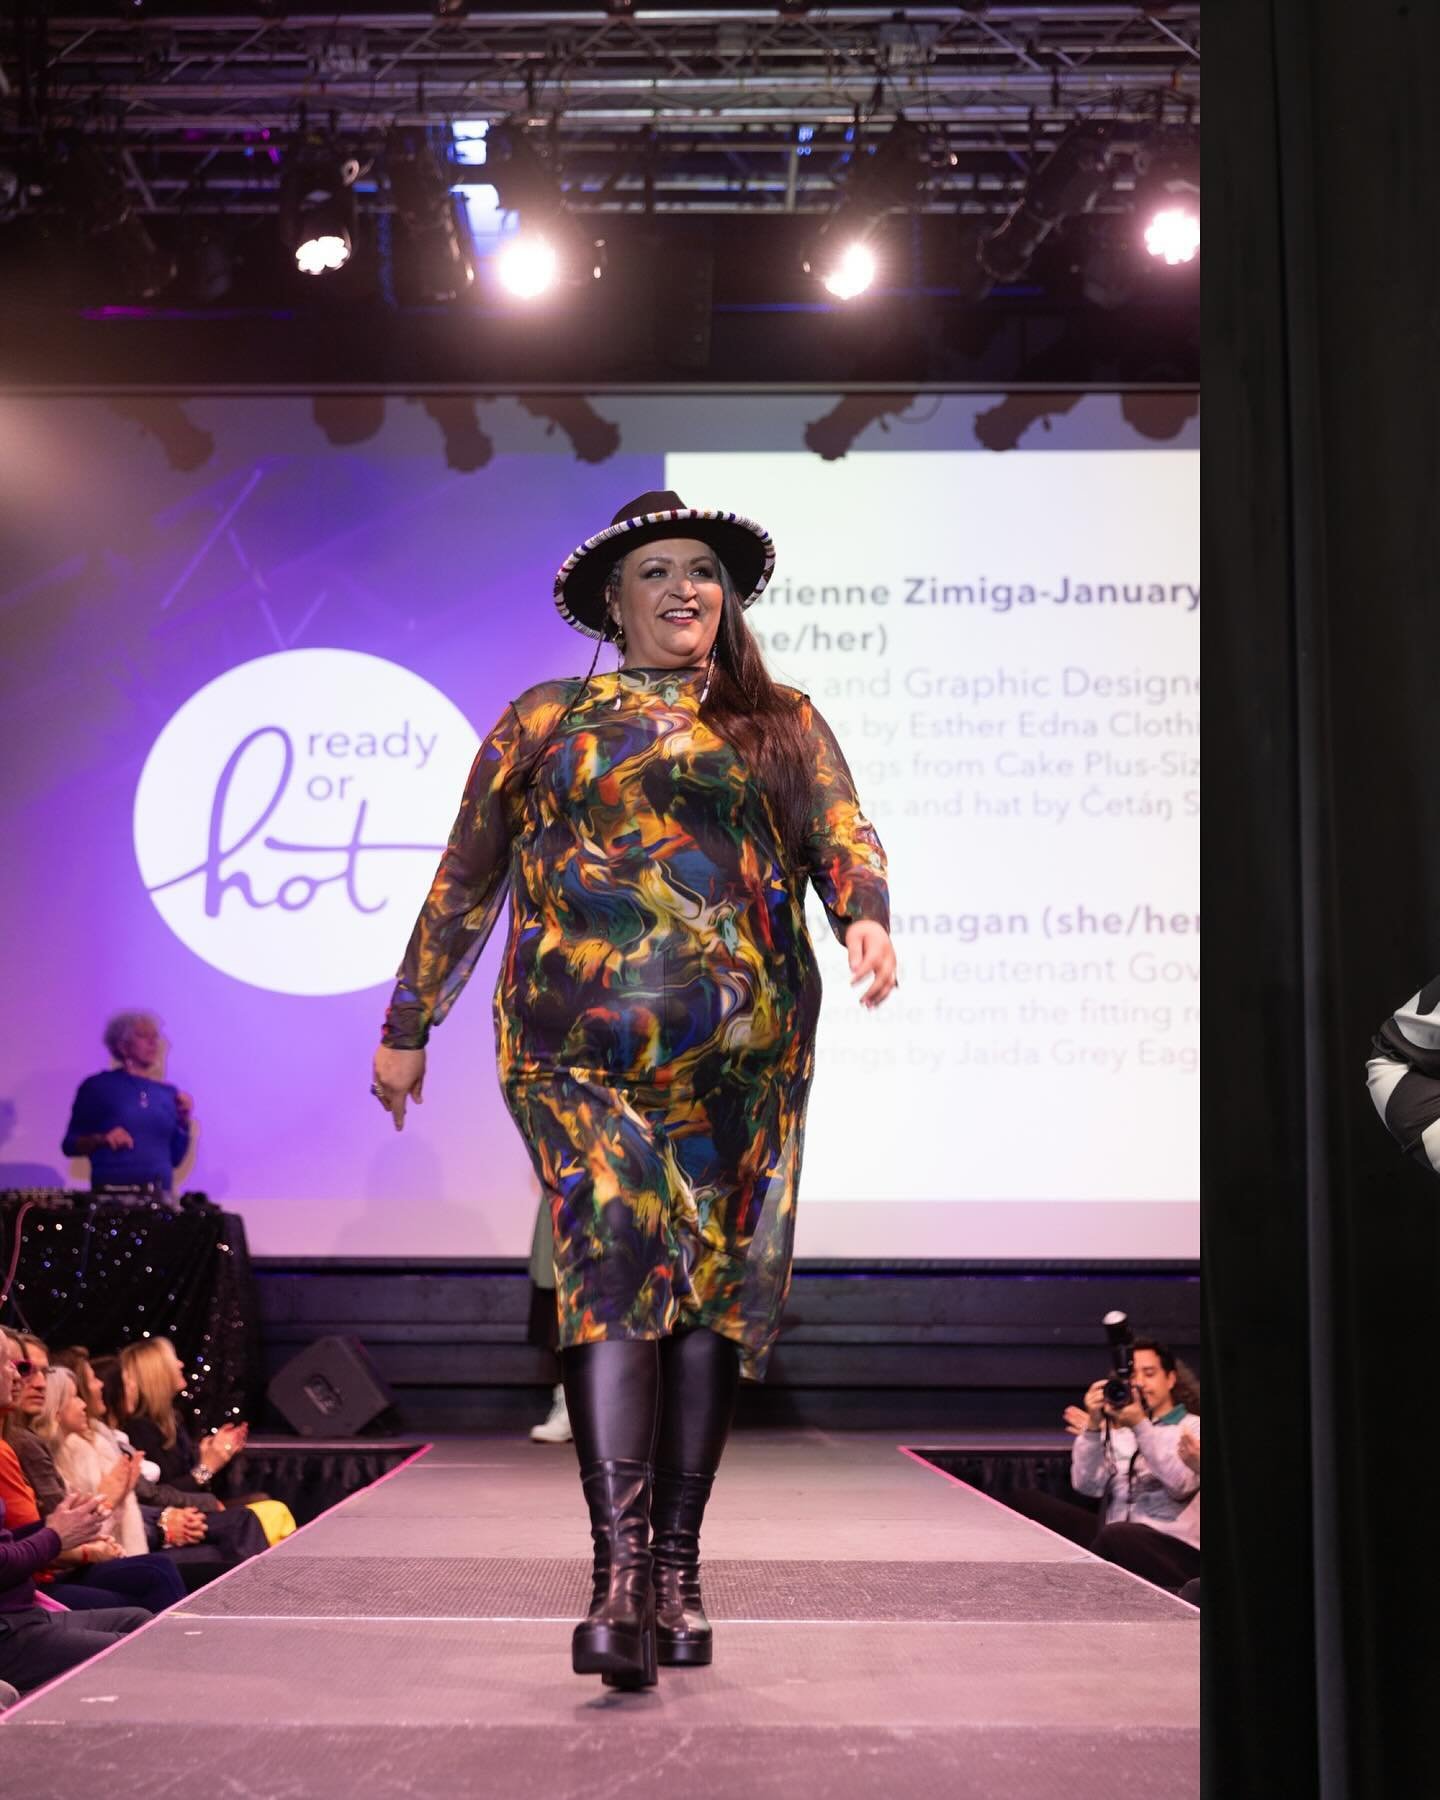 So excited to have photos to share from the @ppnorthcentralstates 2024 Hot or Ready fashion show back in February! 🤩💕

So glad to have been included in this and have so many awesome models repping Cake on the runway including our very own Paxyshia!